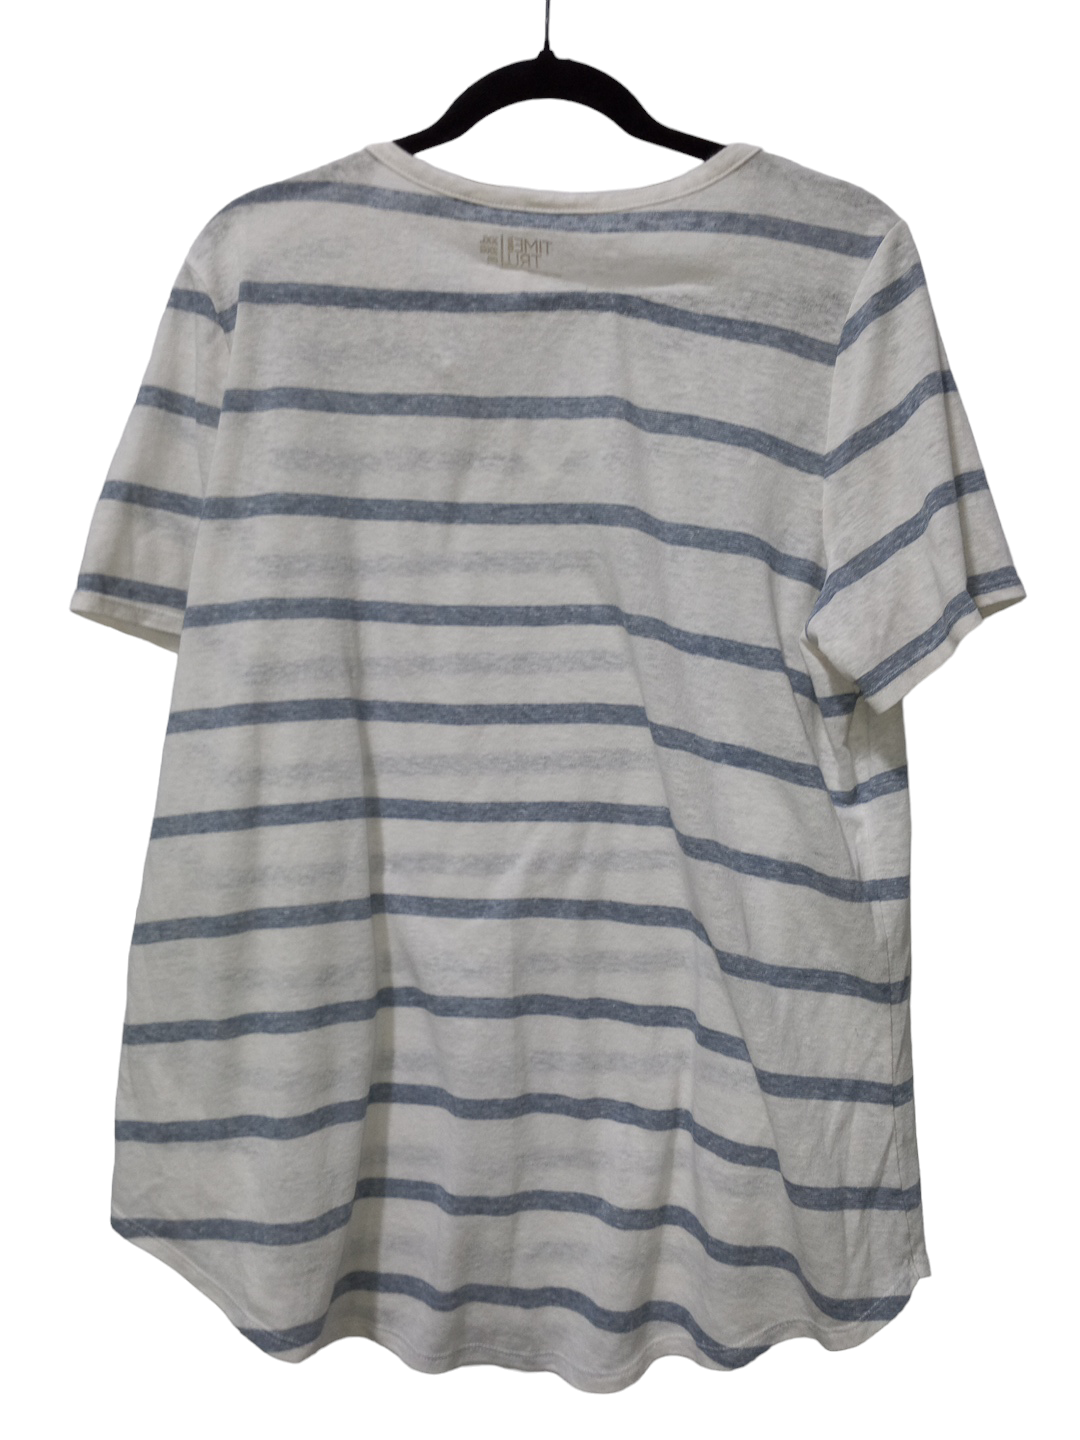 Striped Pattern Top Short Sleeve Time And Tru, Size 2x